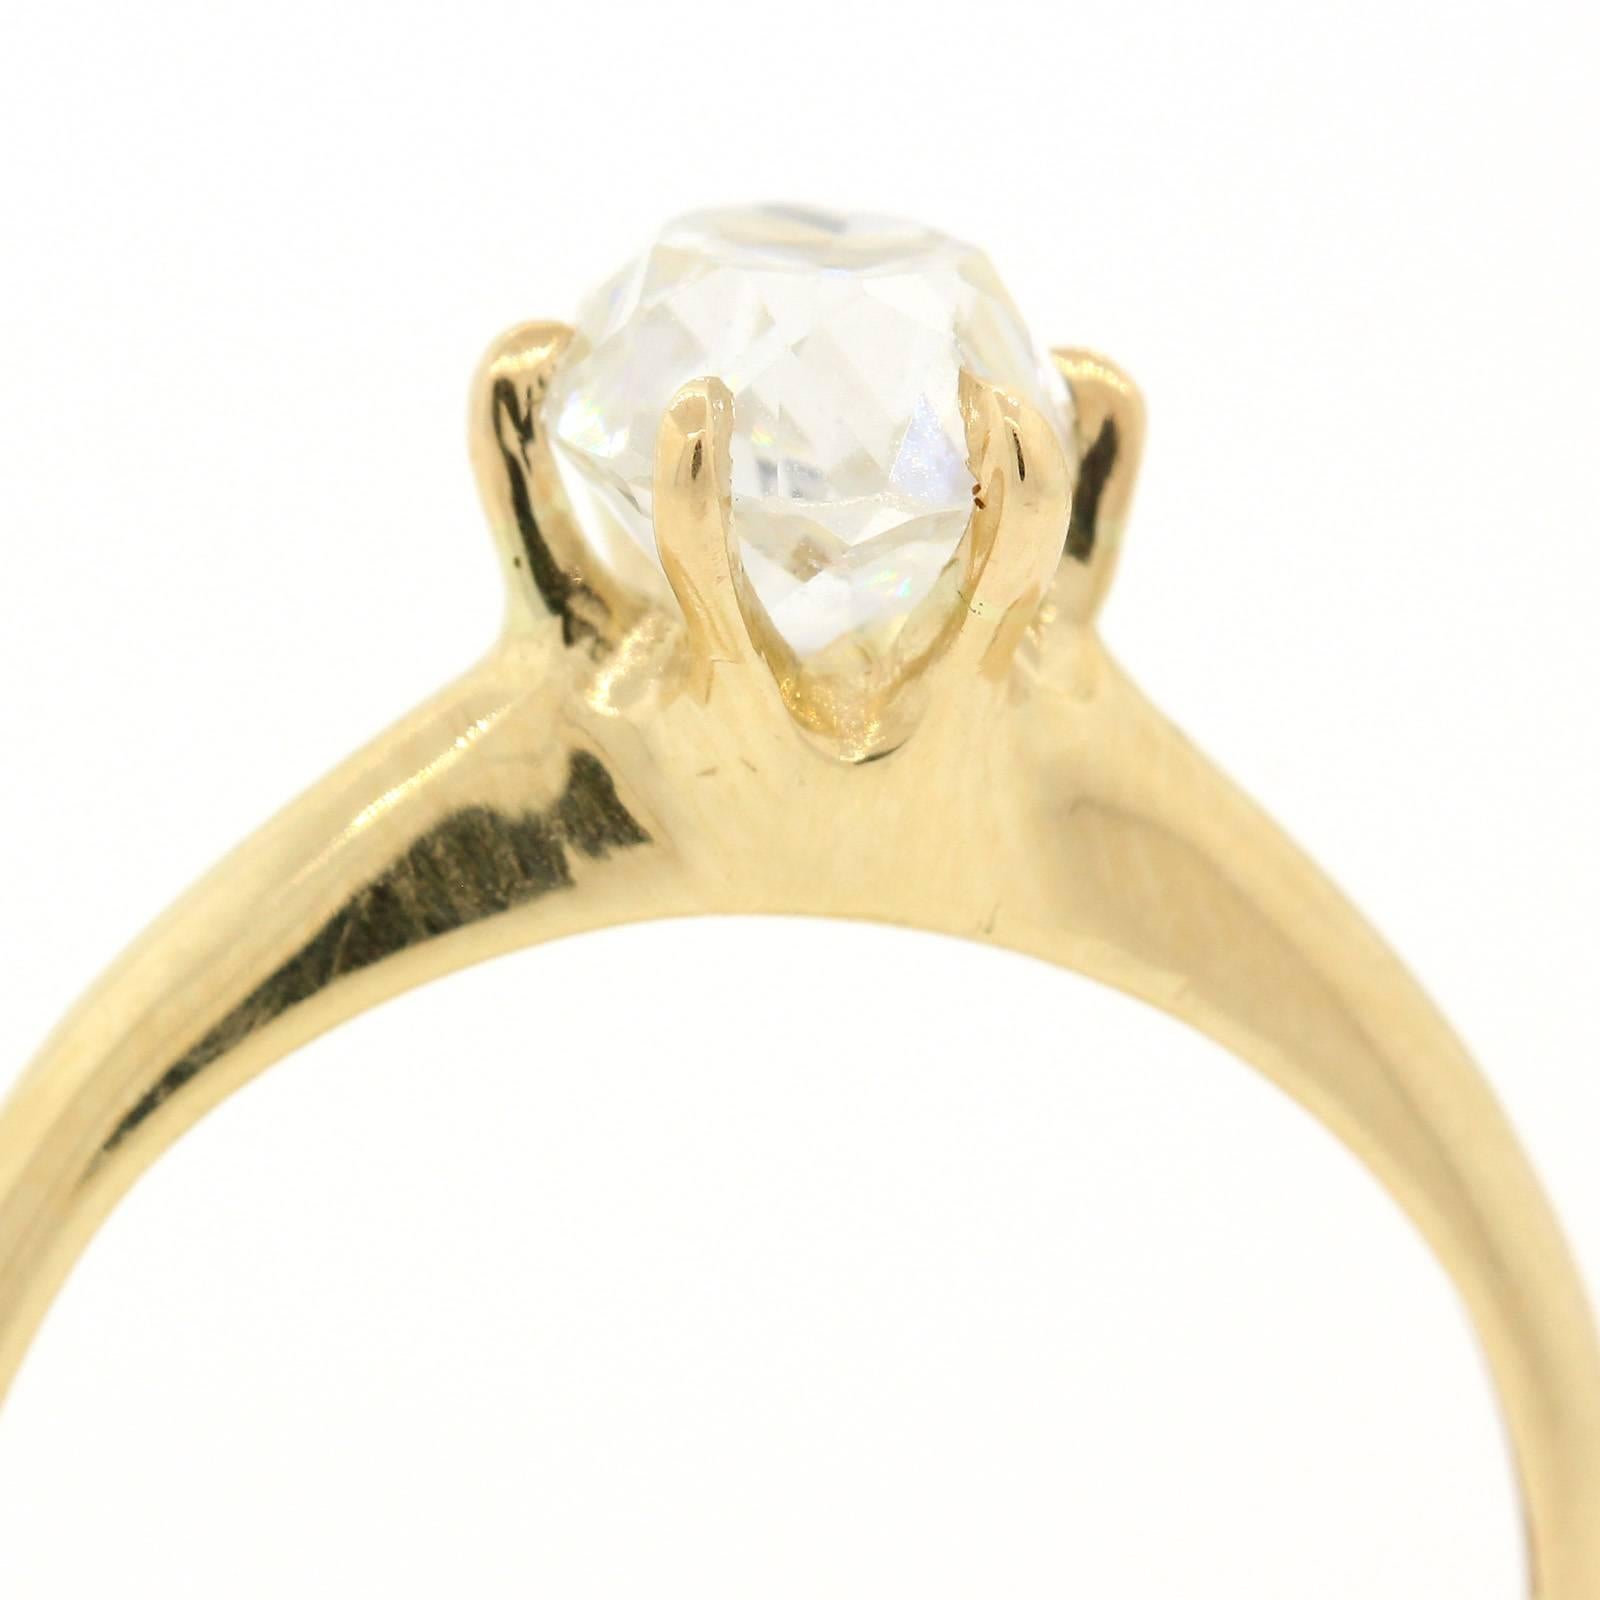 Less is more!  A gorgeous 1900s 18KT yellow gold ring featuring an Old  Cushion MIne Cut Diamond weighing 1.12 carats, certified E.G.L. USA  D color VS1 clarity.  The six prong setting is stamped 